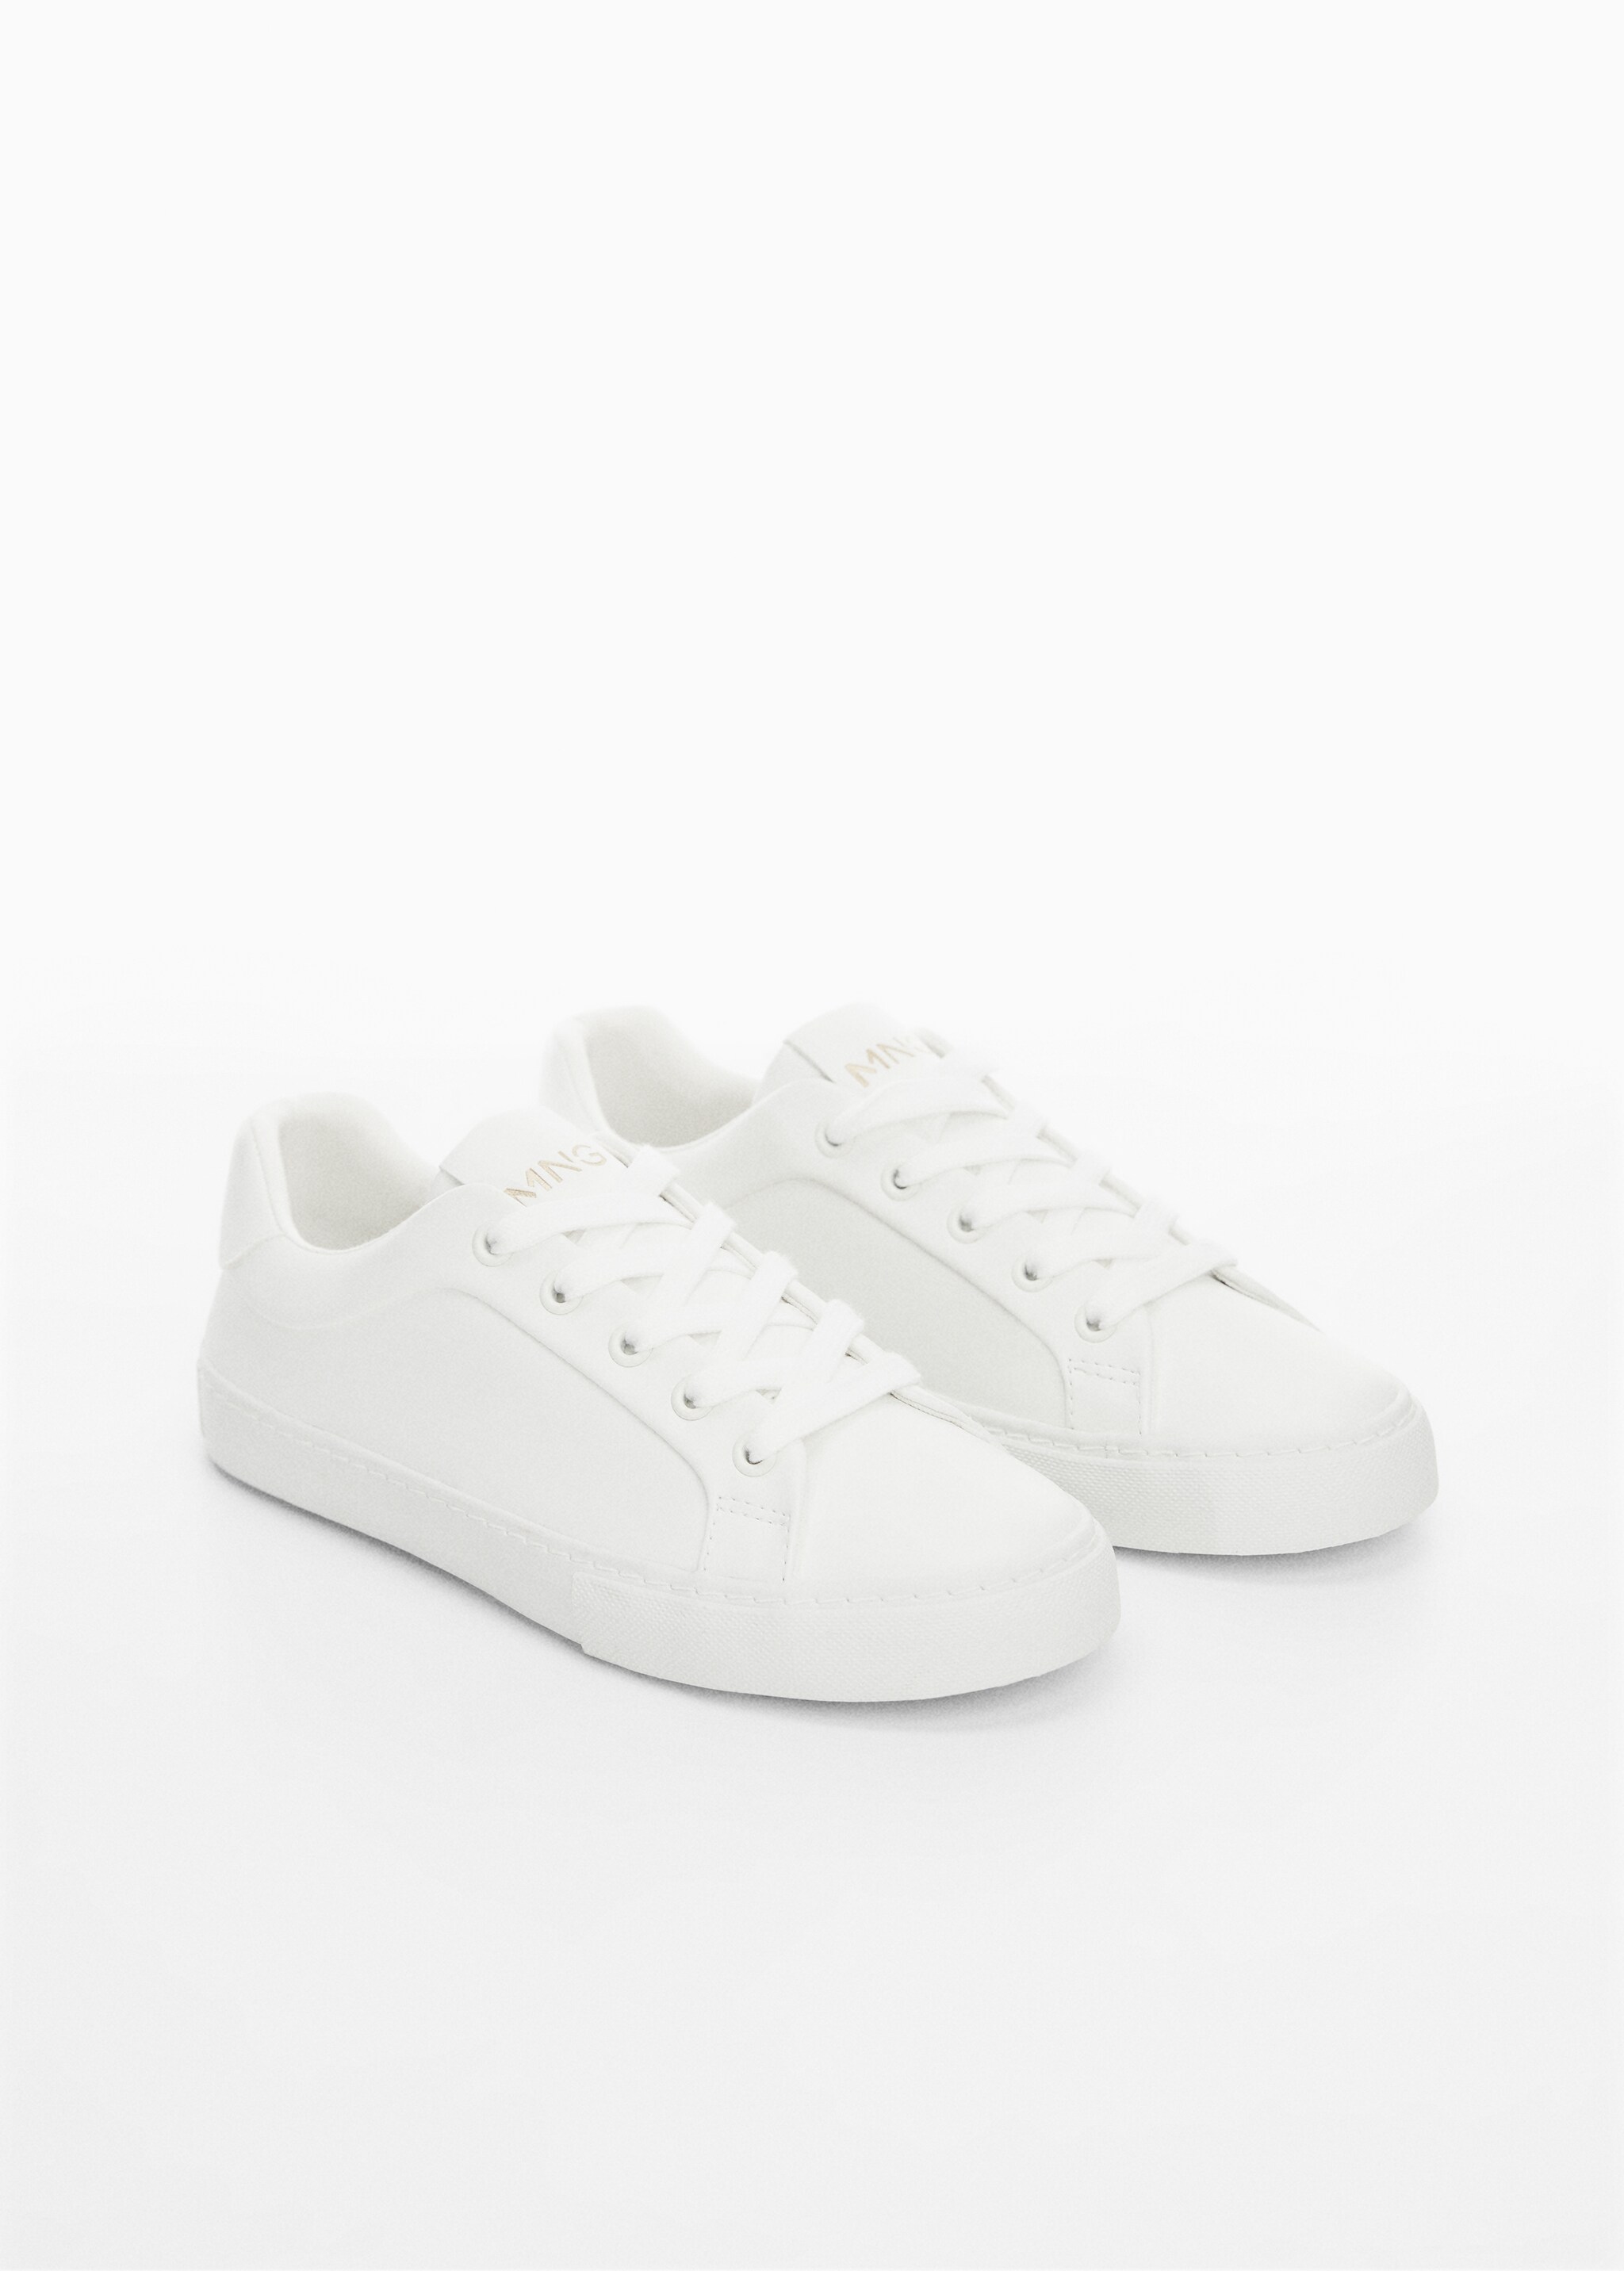 Lace-up sneakers - Medium plane